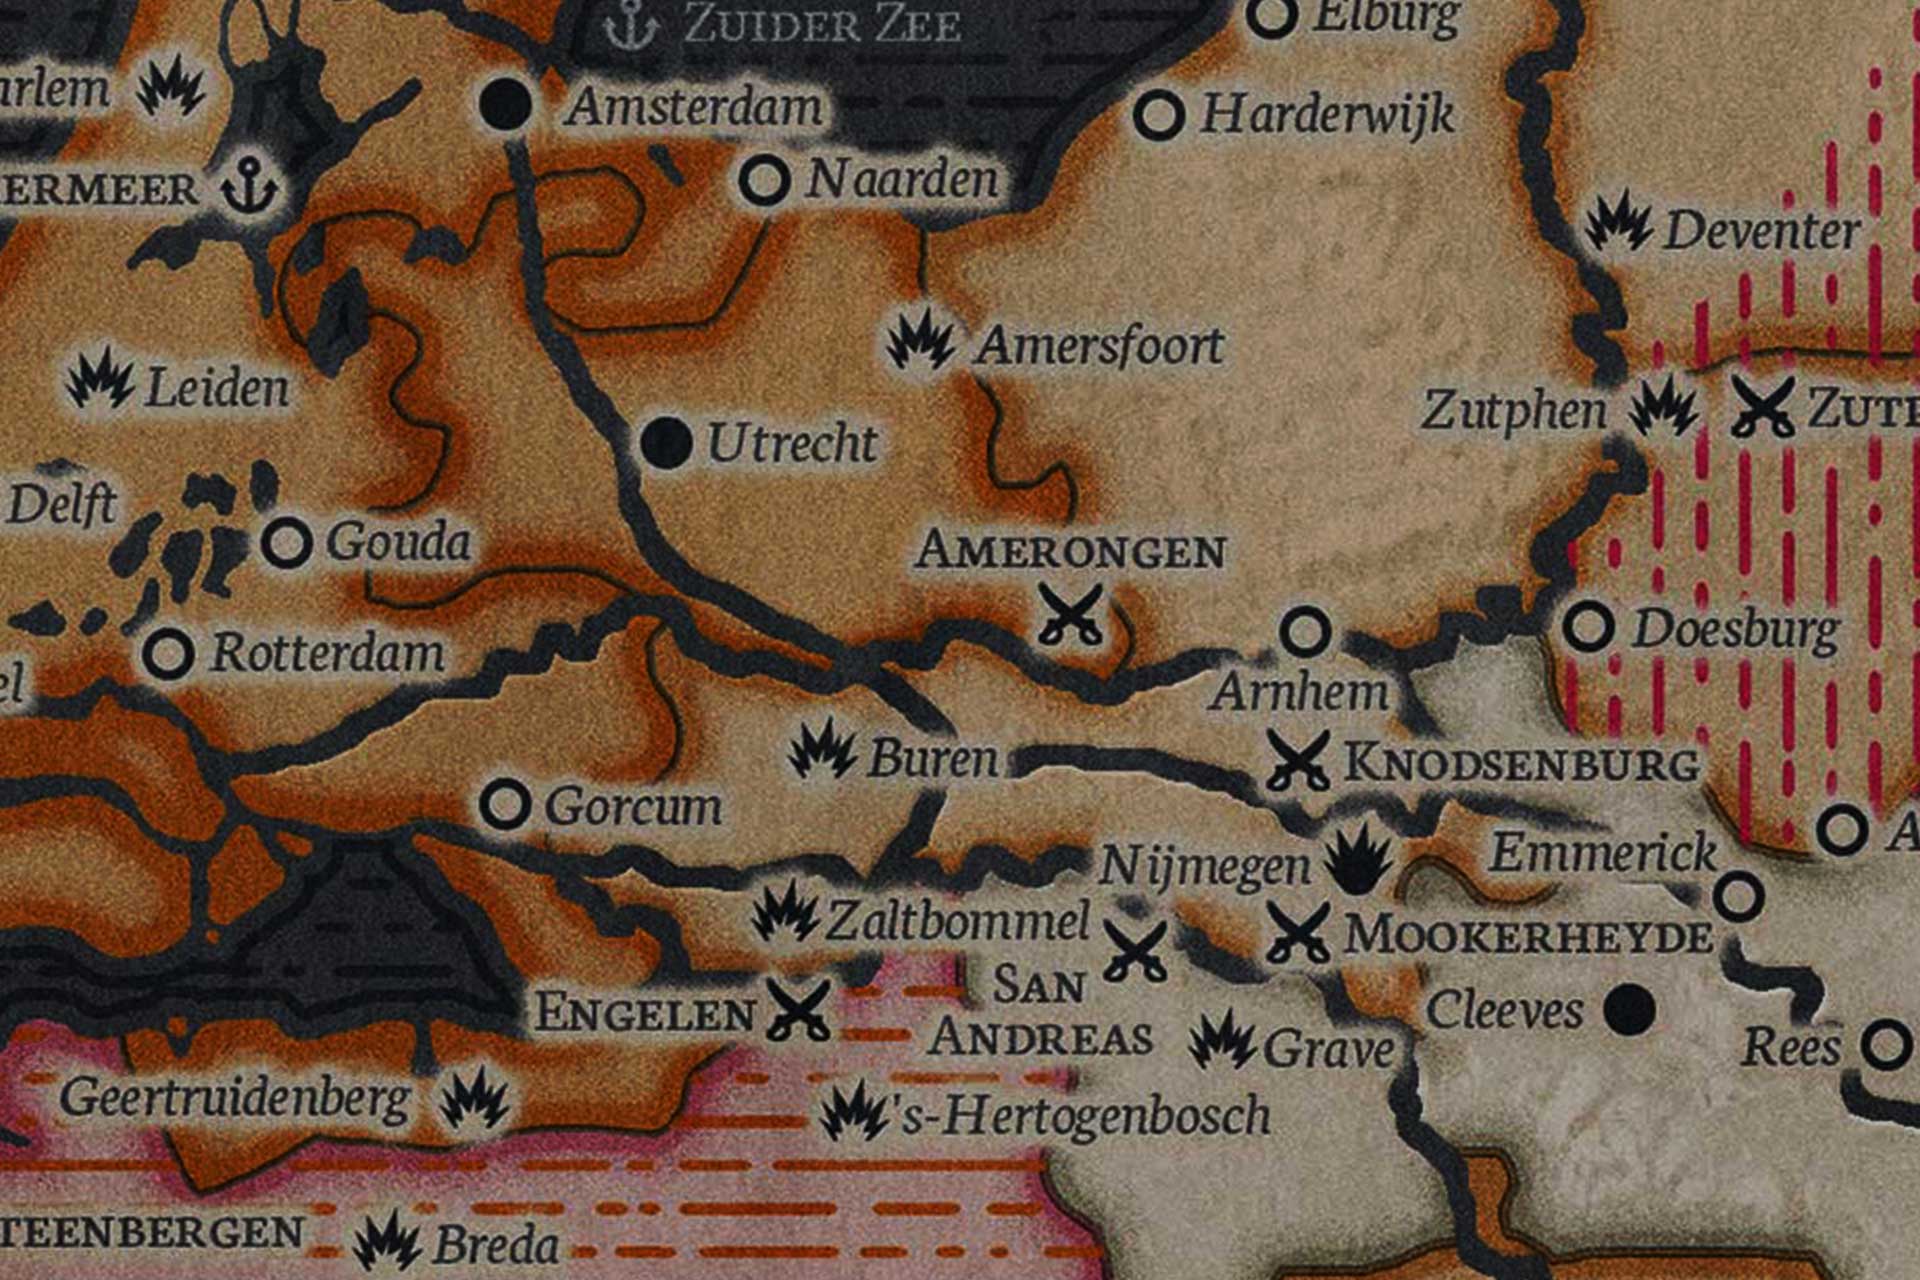 Map of the Cities & Battles of the Dutch Revolt